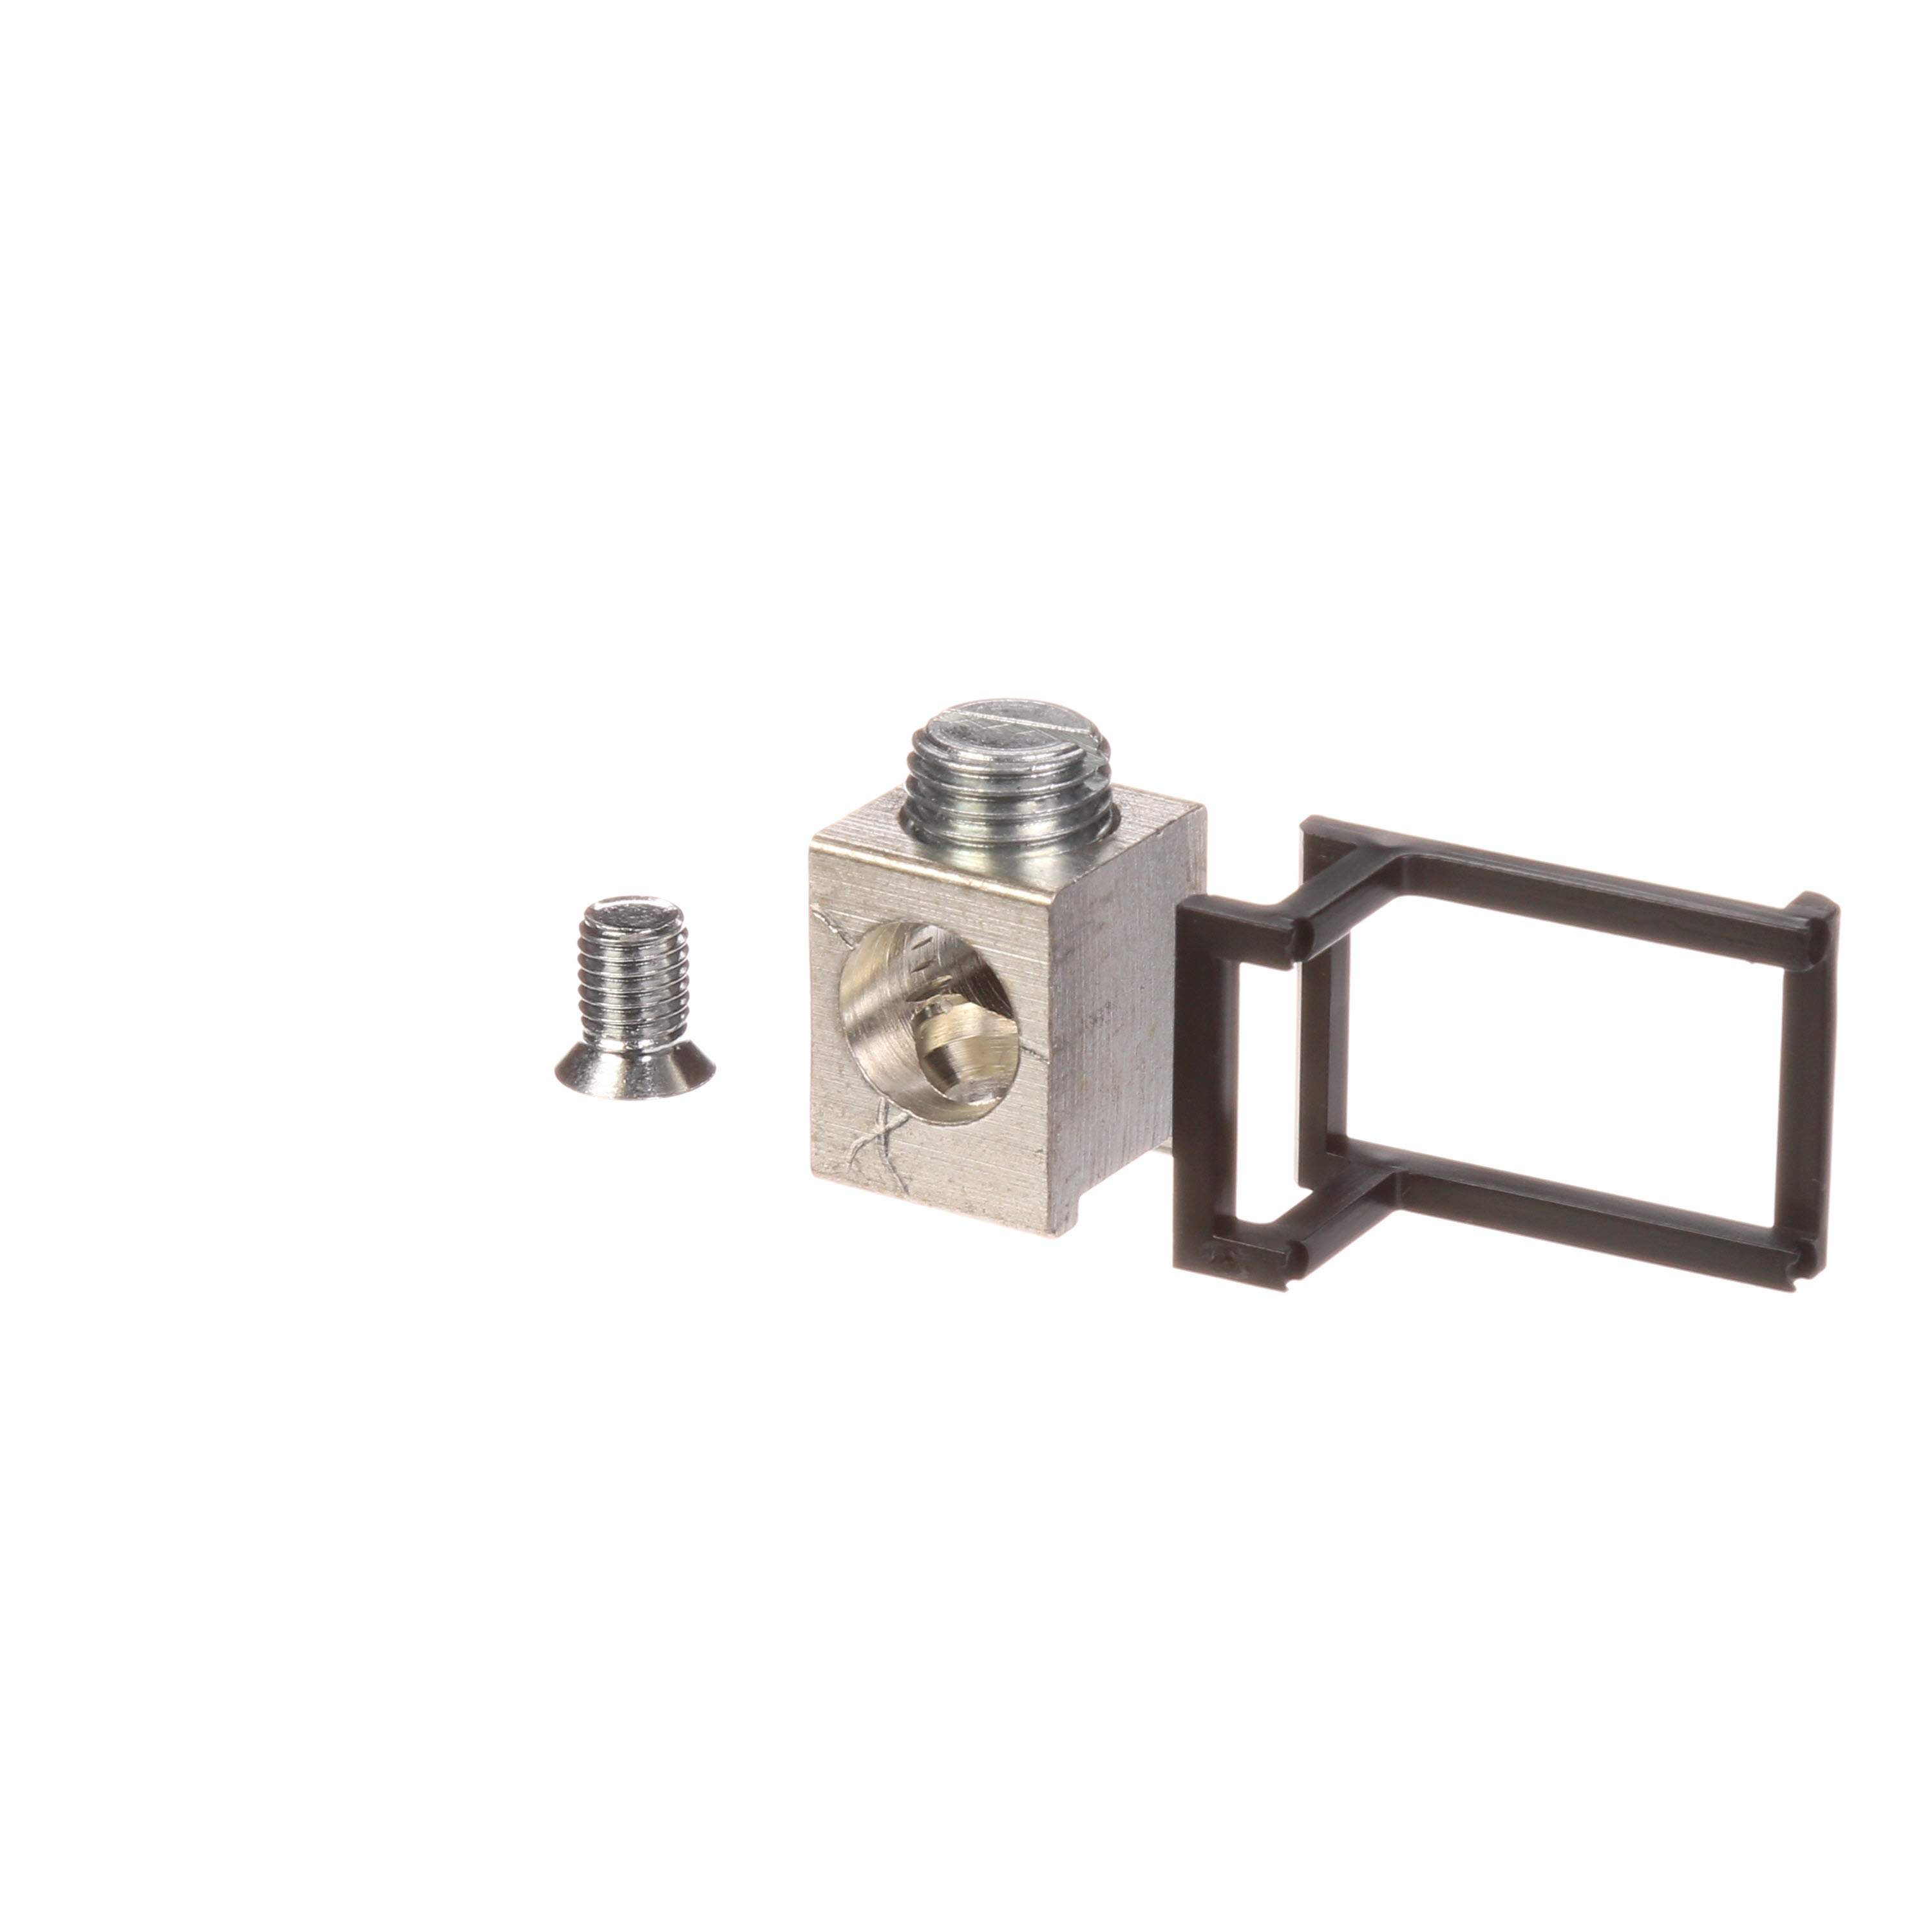 Siemens Low Voltage Residential Specialty Load Centers Lug Kits. Neutral lug 2 to 1/0 for EQIII LC load centers.